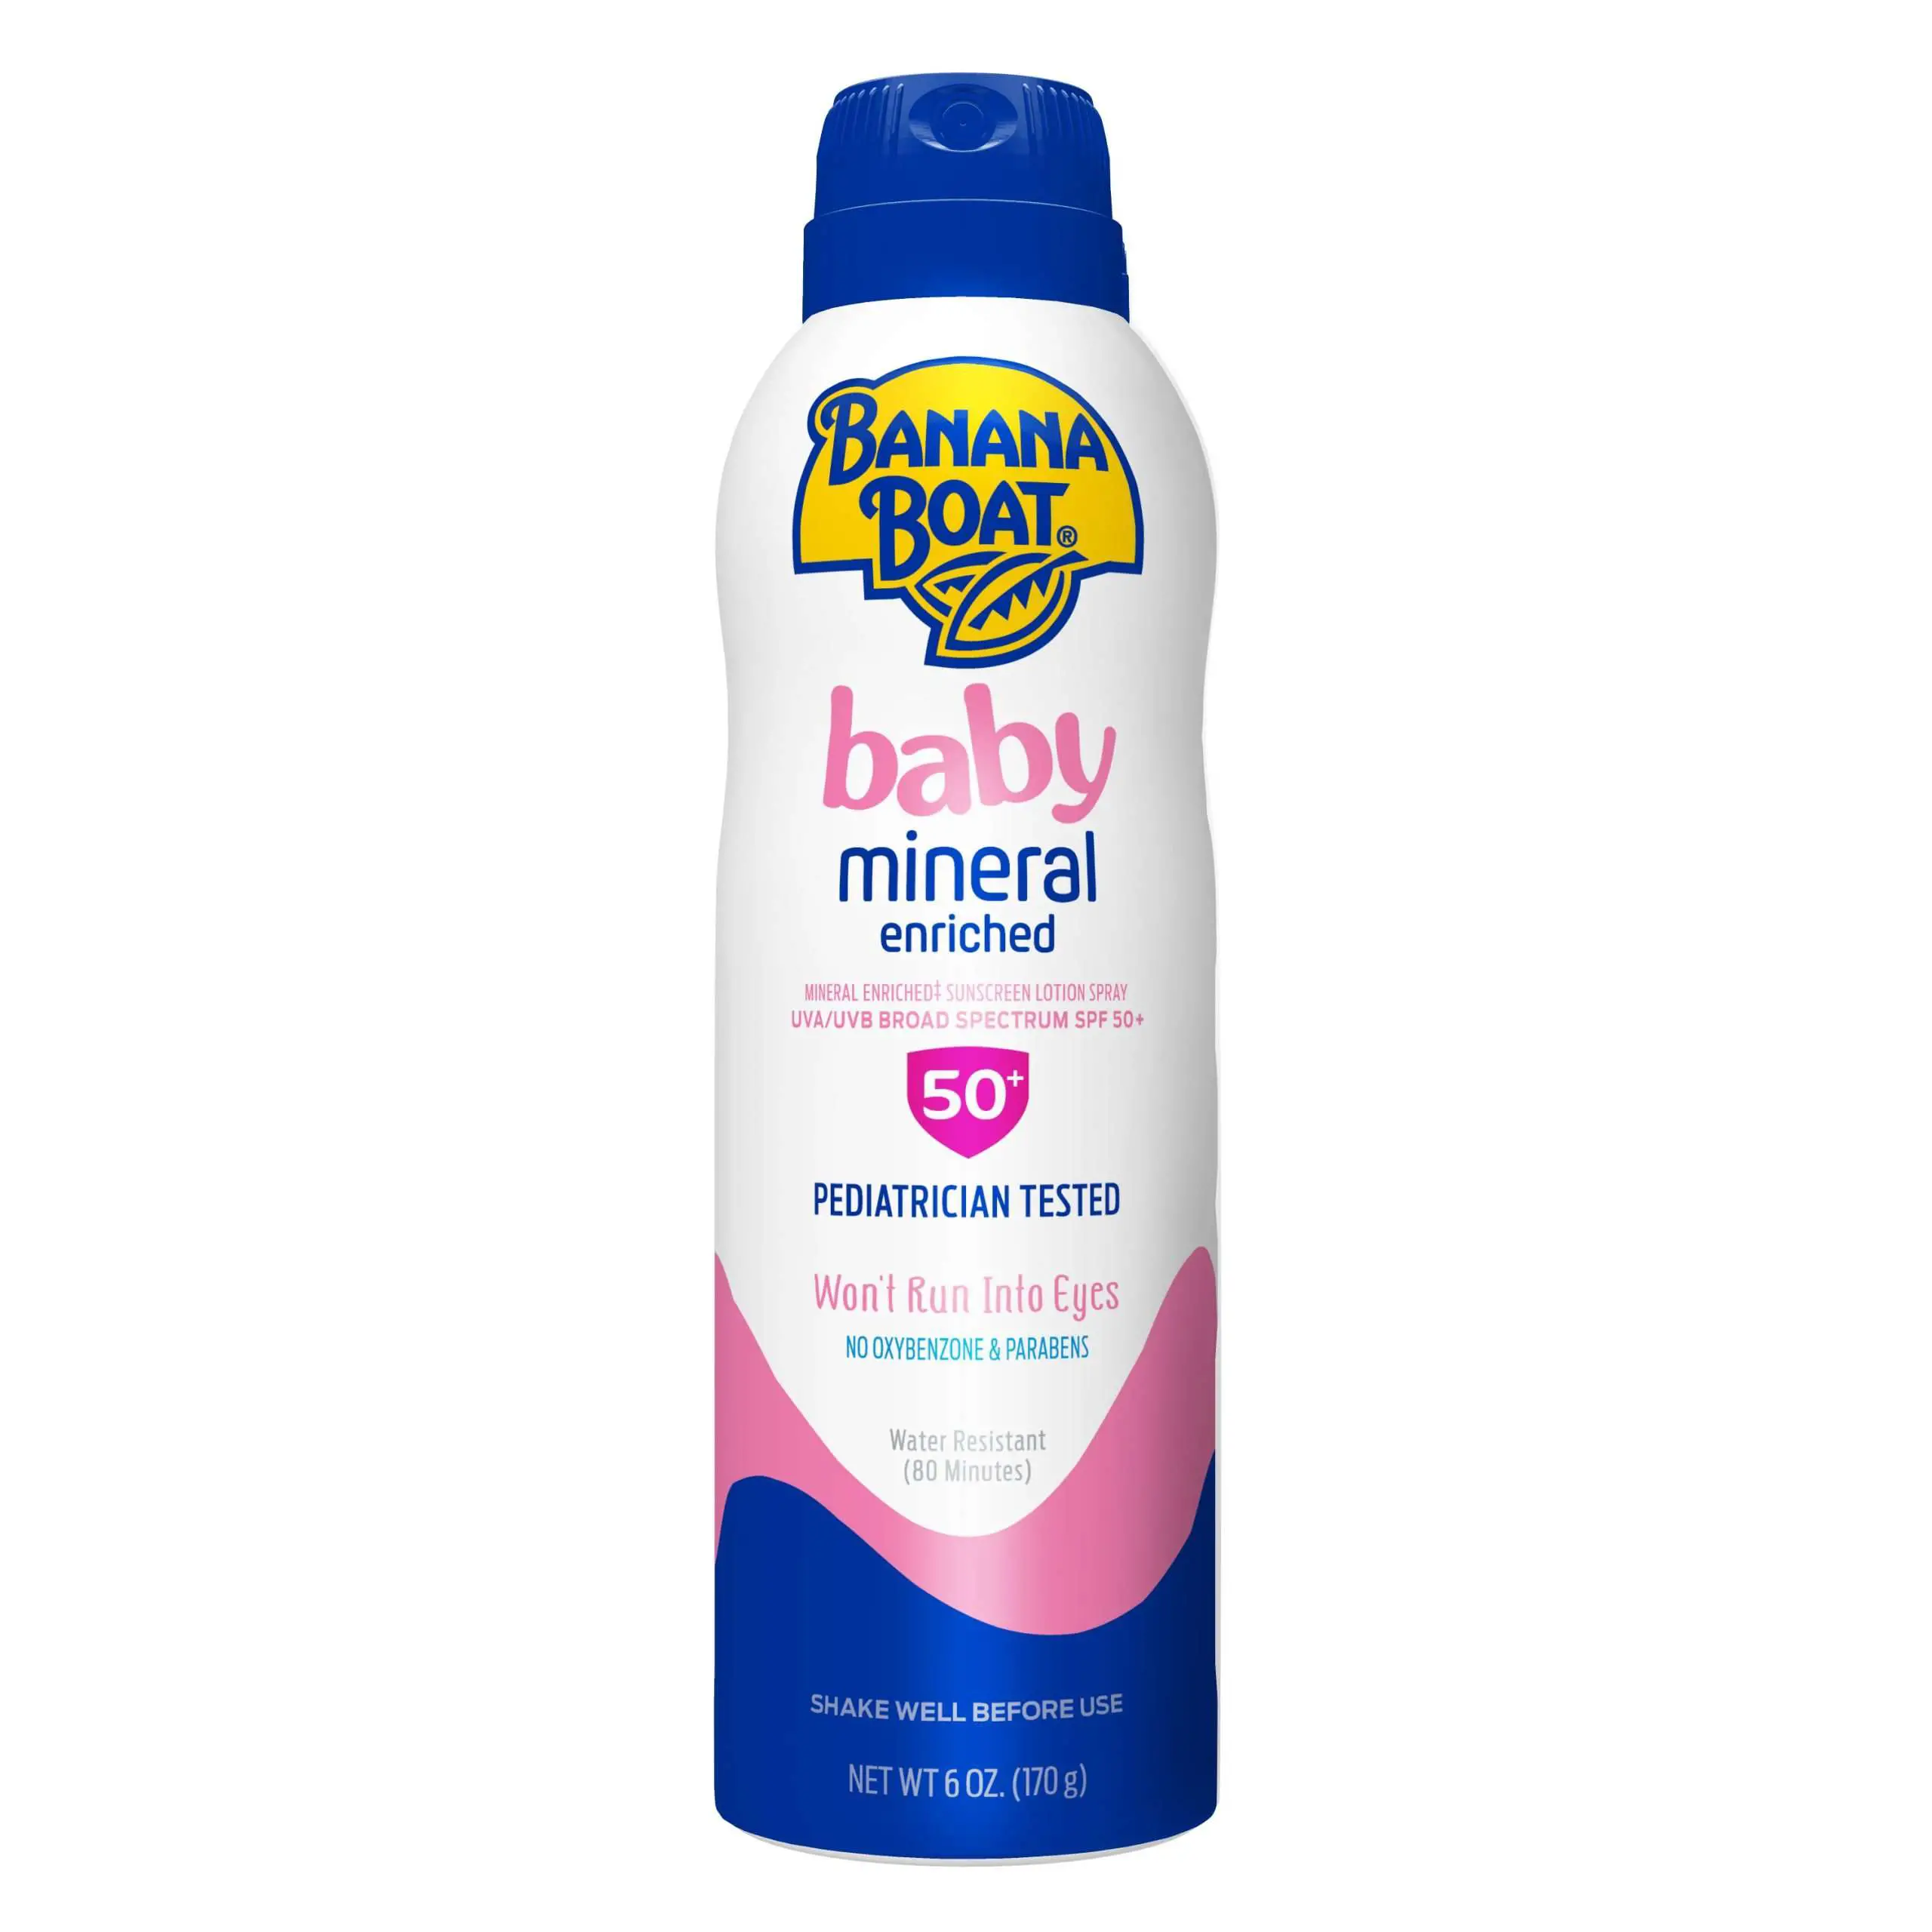 Banana Boat Baby Mineral Enriched Sunscreen Spray SPF 50 ...